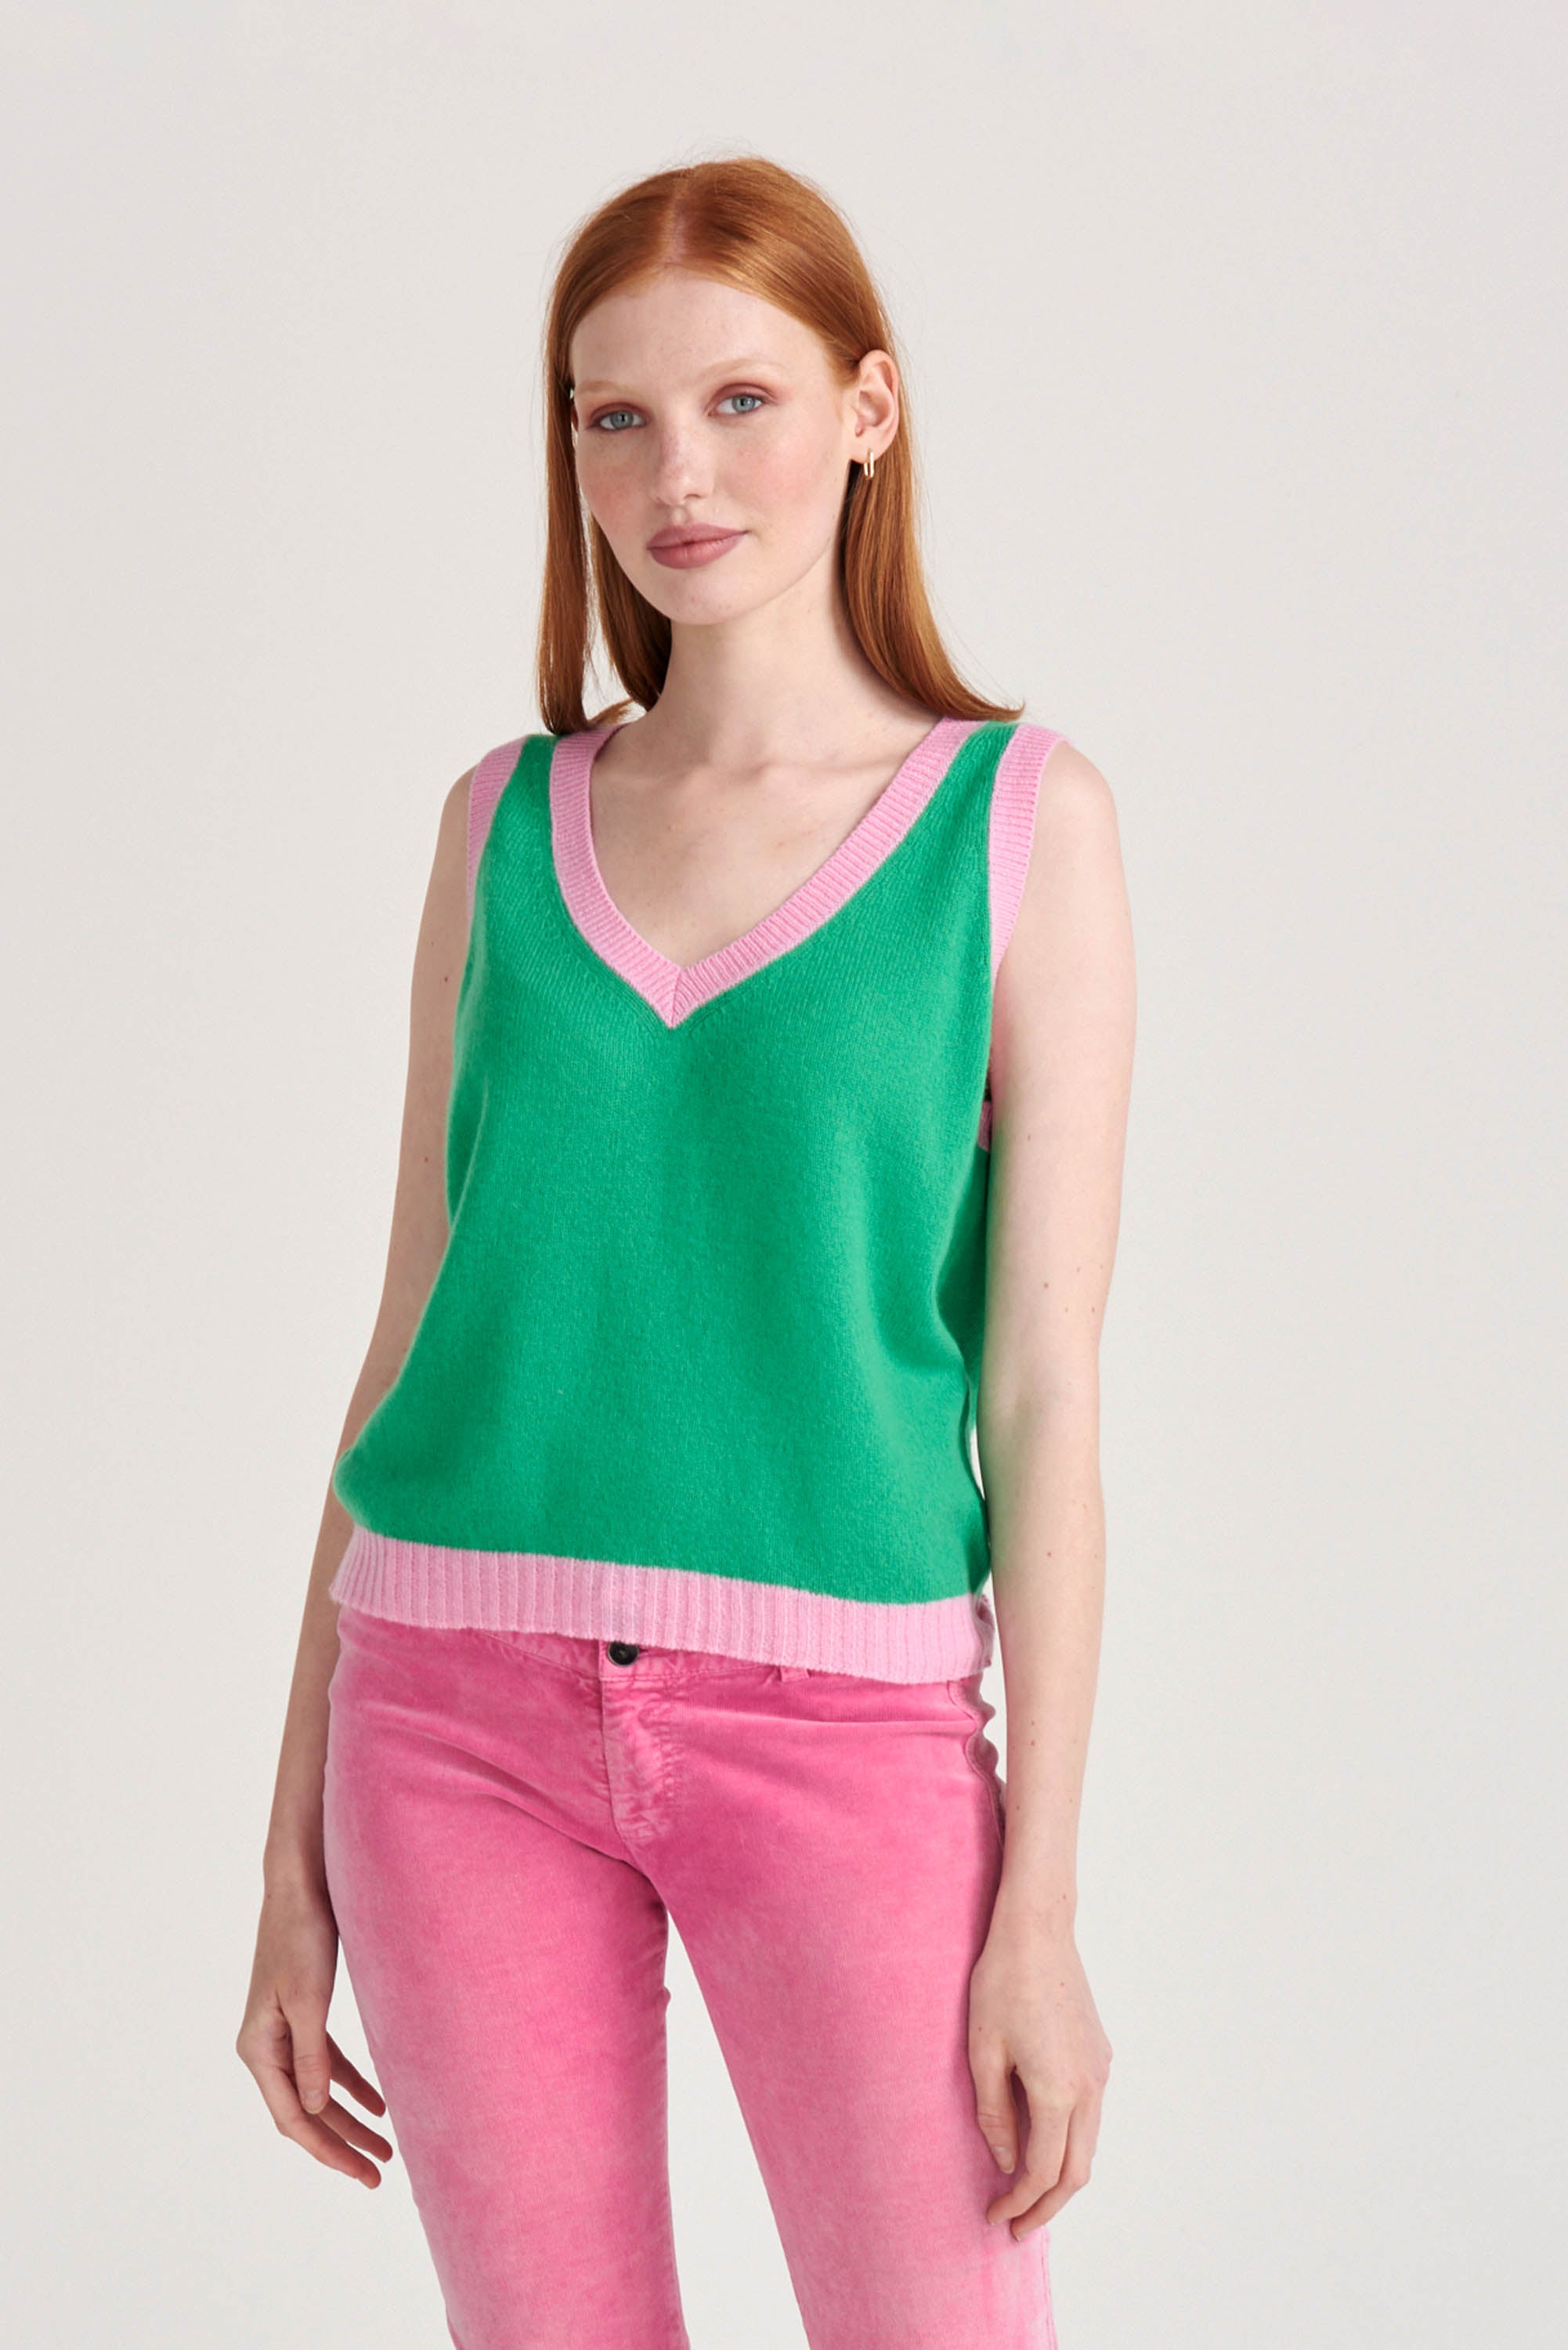 Red haired female model wearing Jumper1234 Bright green cashmere vee neck tank with contrast rose pink ribs